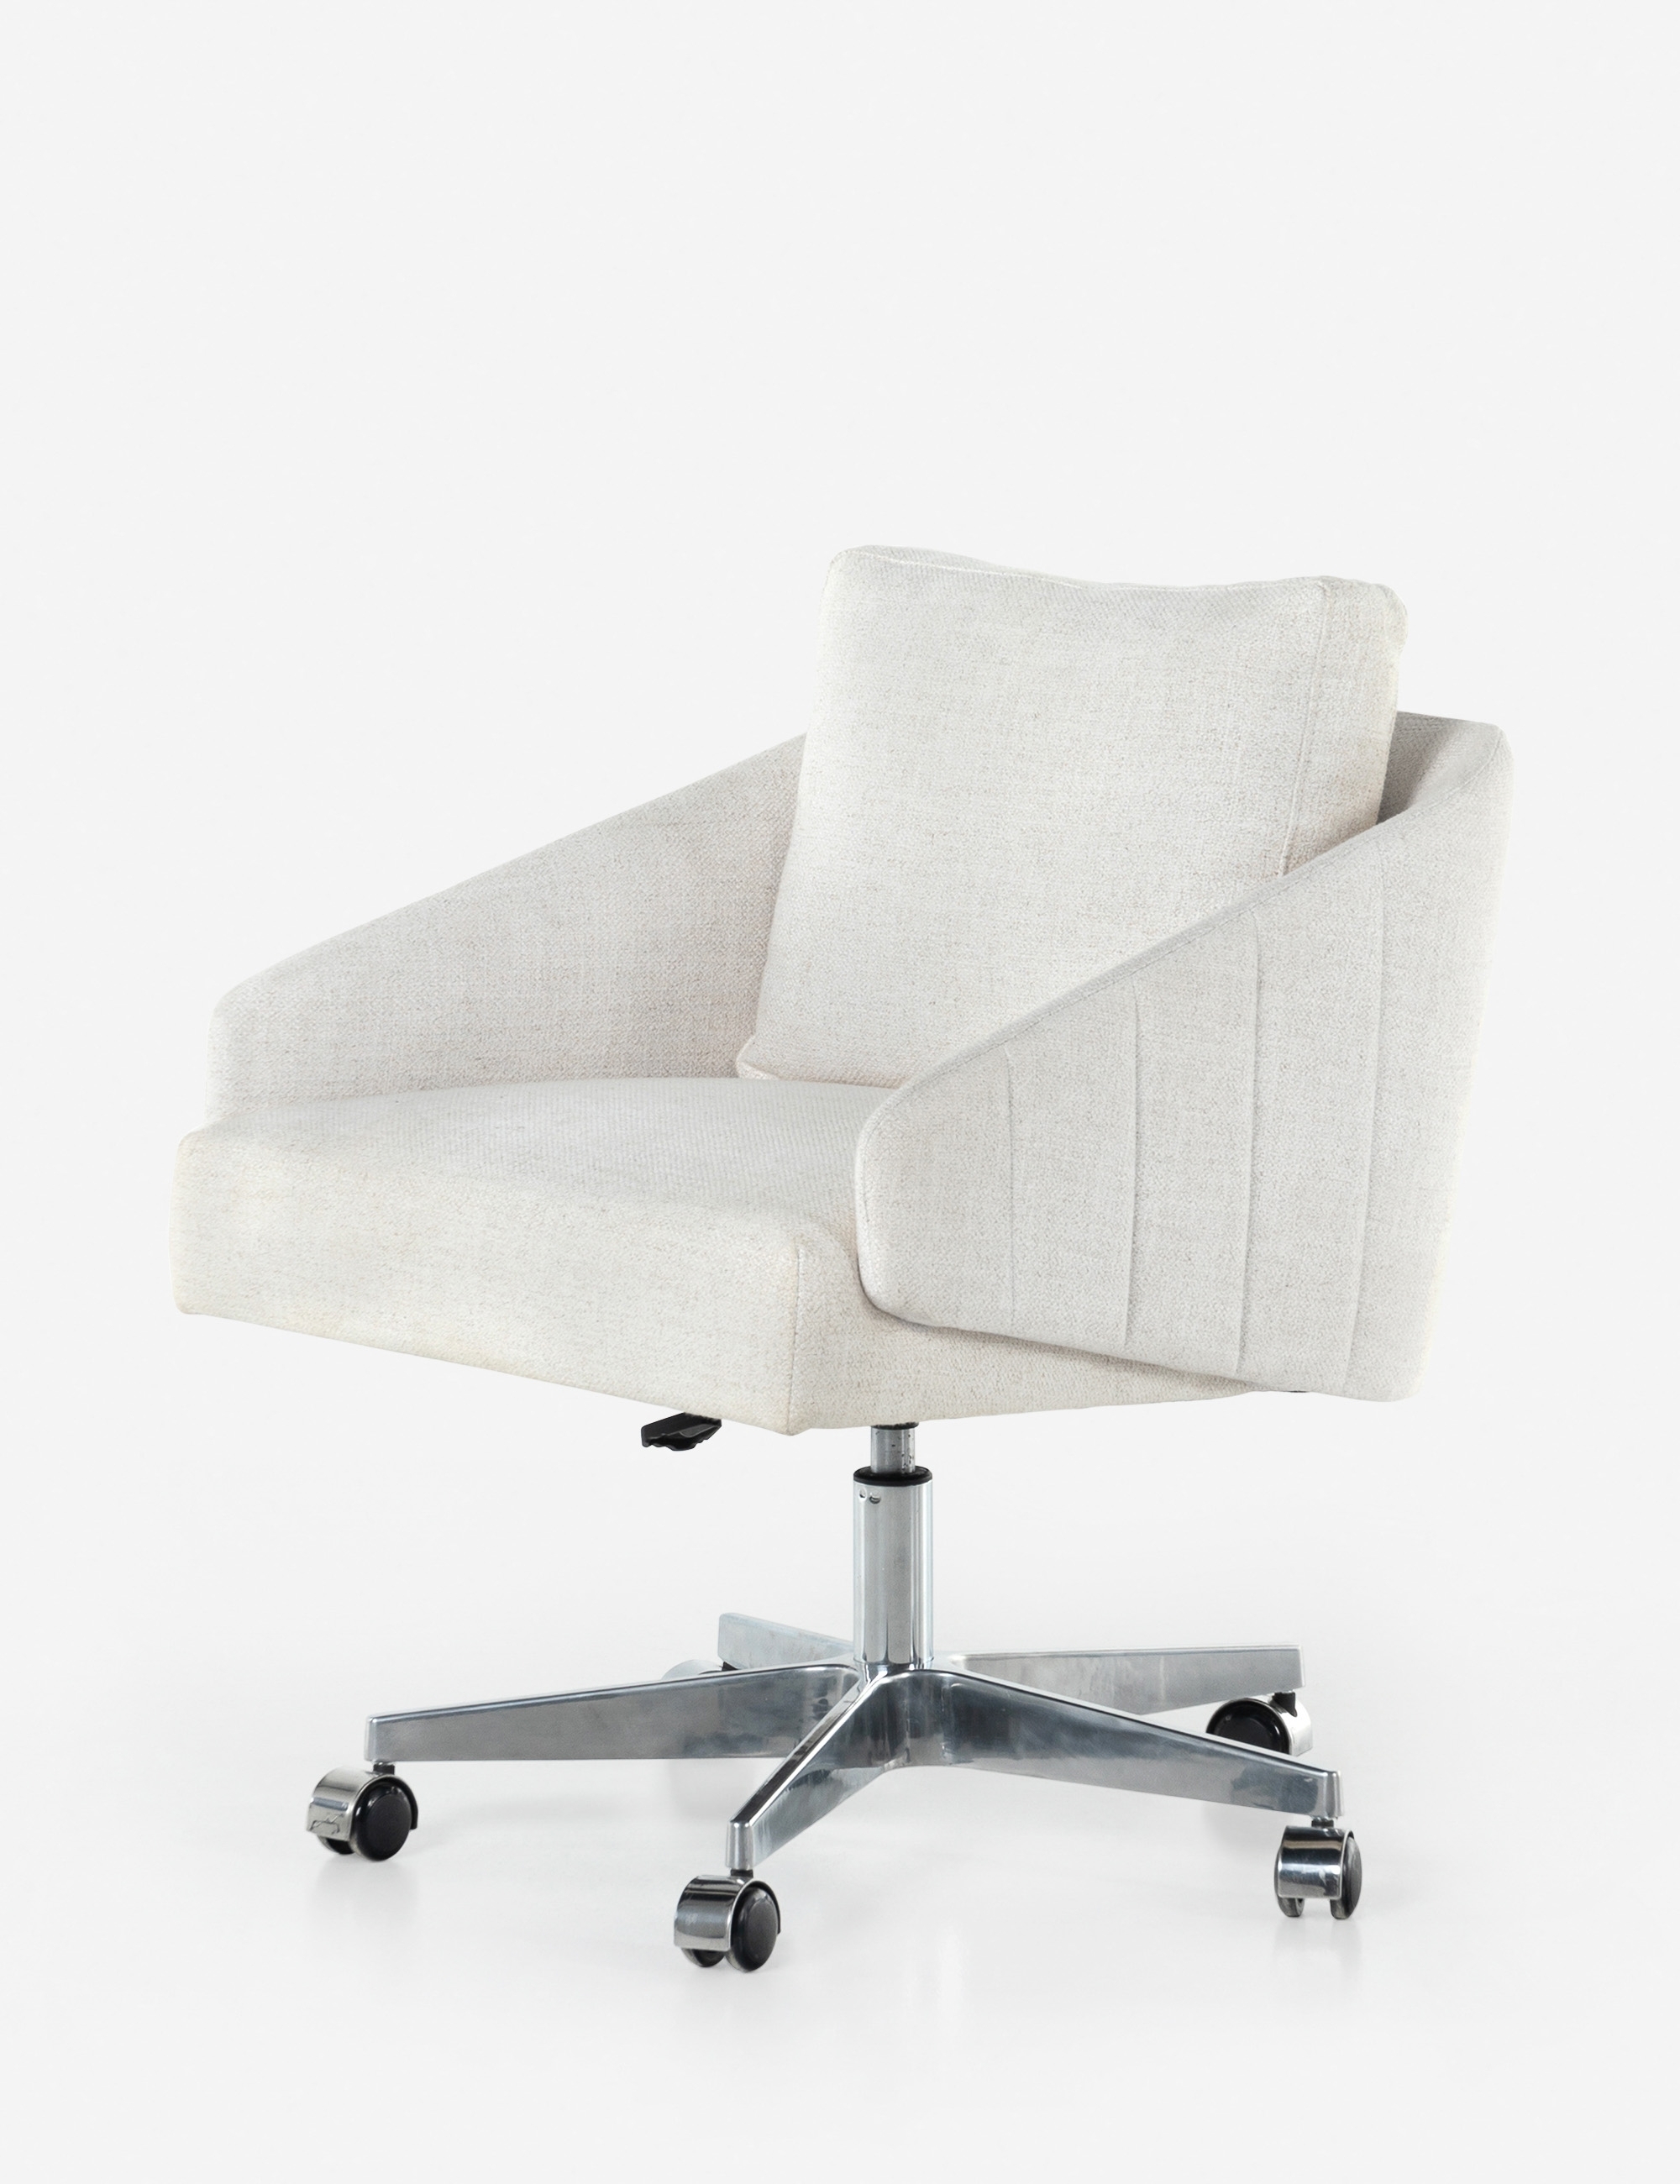 Braeleigh Office Chair - Image 4